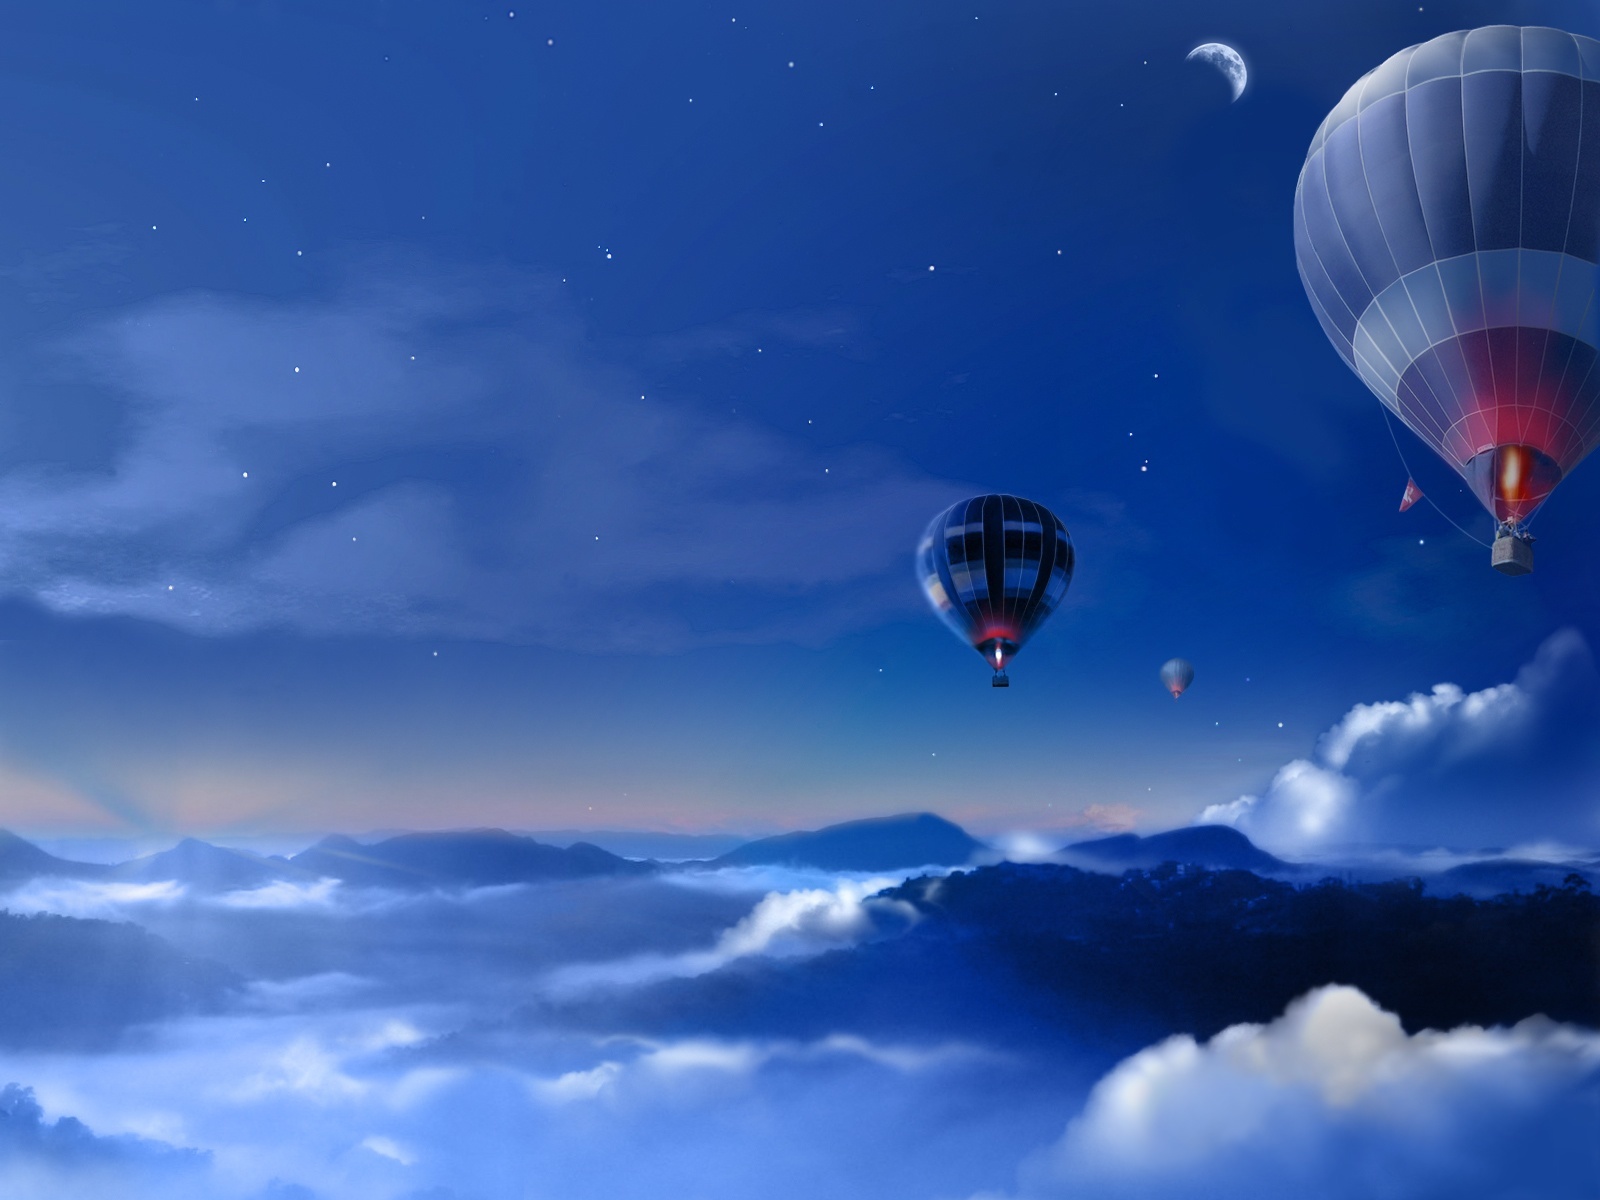 balloons, pictures, landscape, sky, night, blue